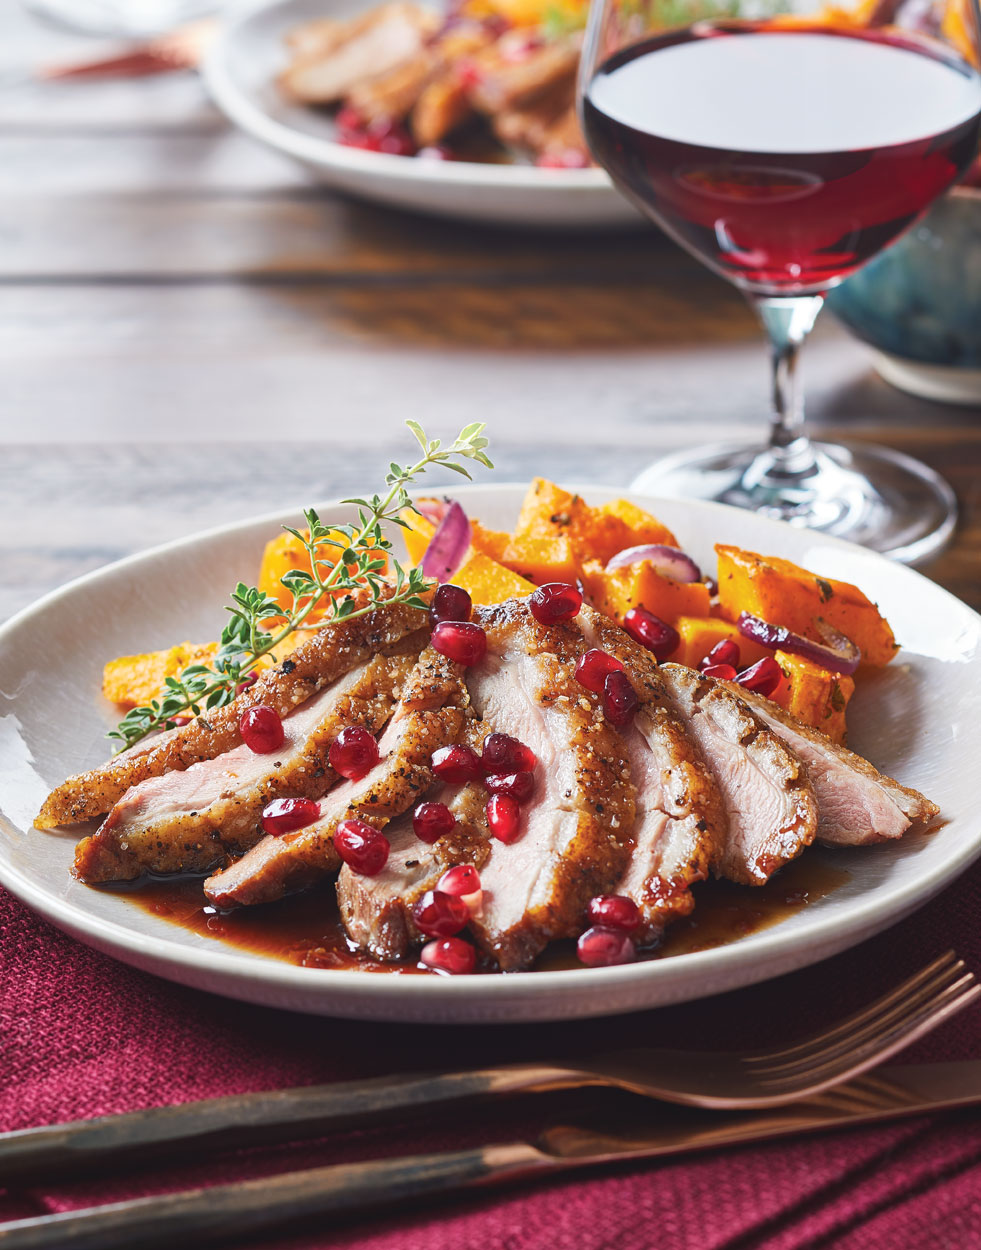 Sautéed Duck Breasts With Pomegranate Sauce Recipe